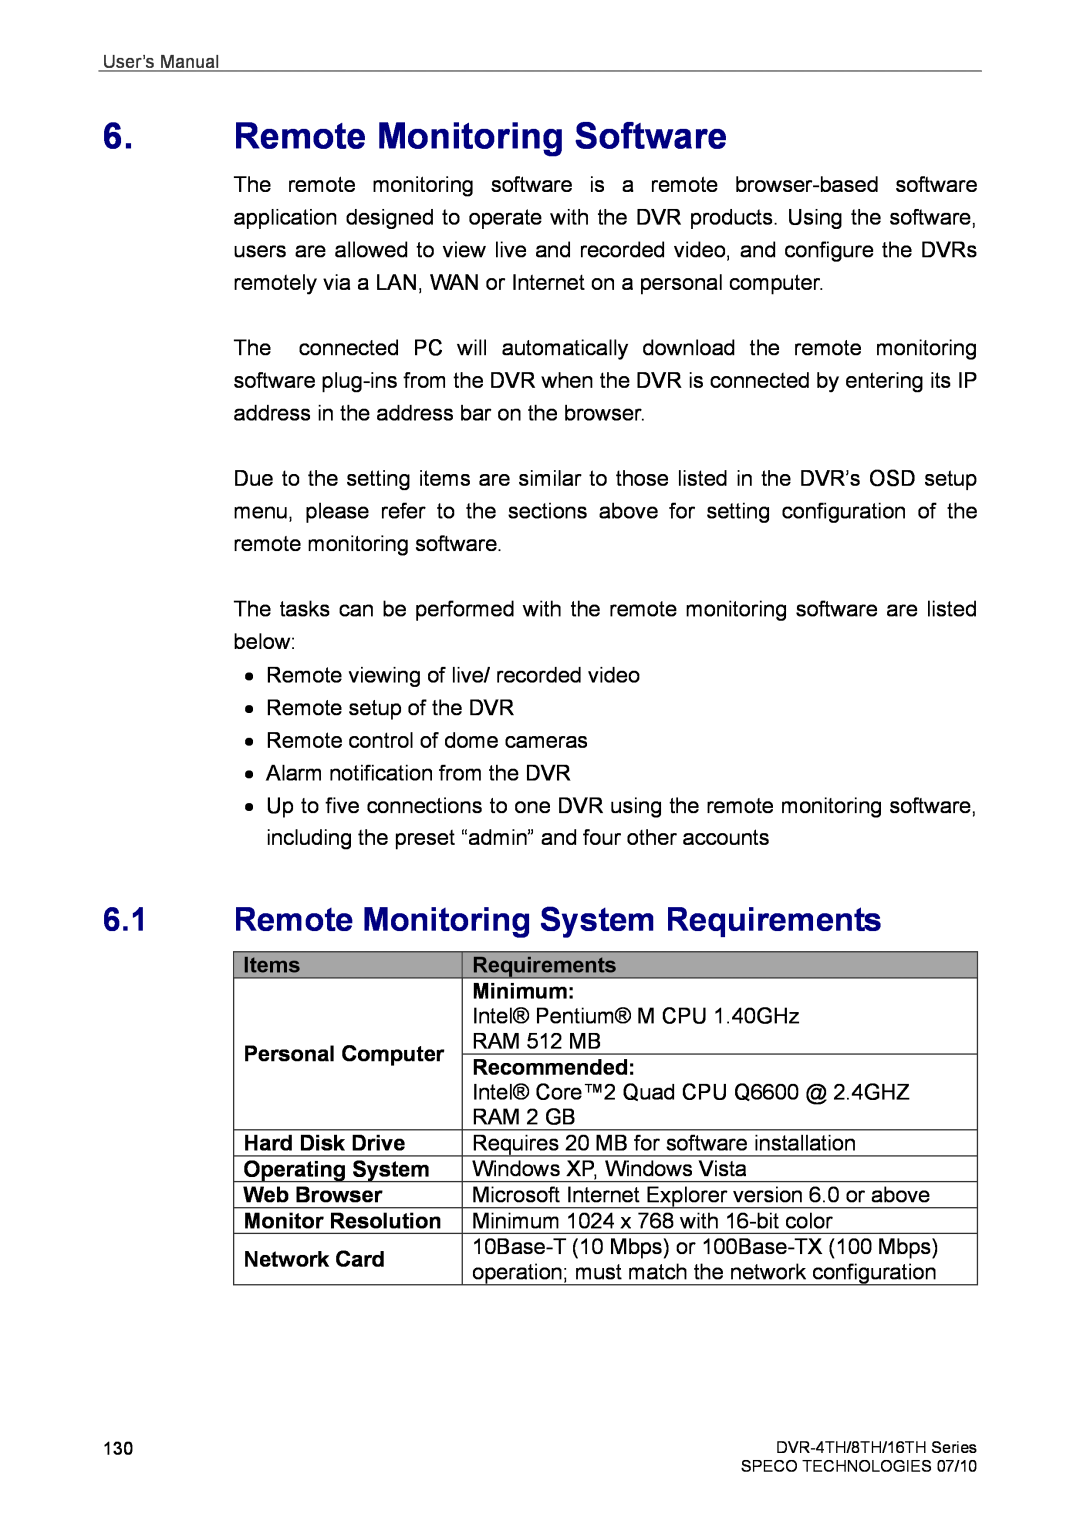 Speco Technologies 16TH Remote Monitoring Software, Remote Monitoring System Requirements, Items, Minimum, Recommended 